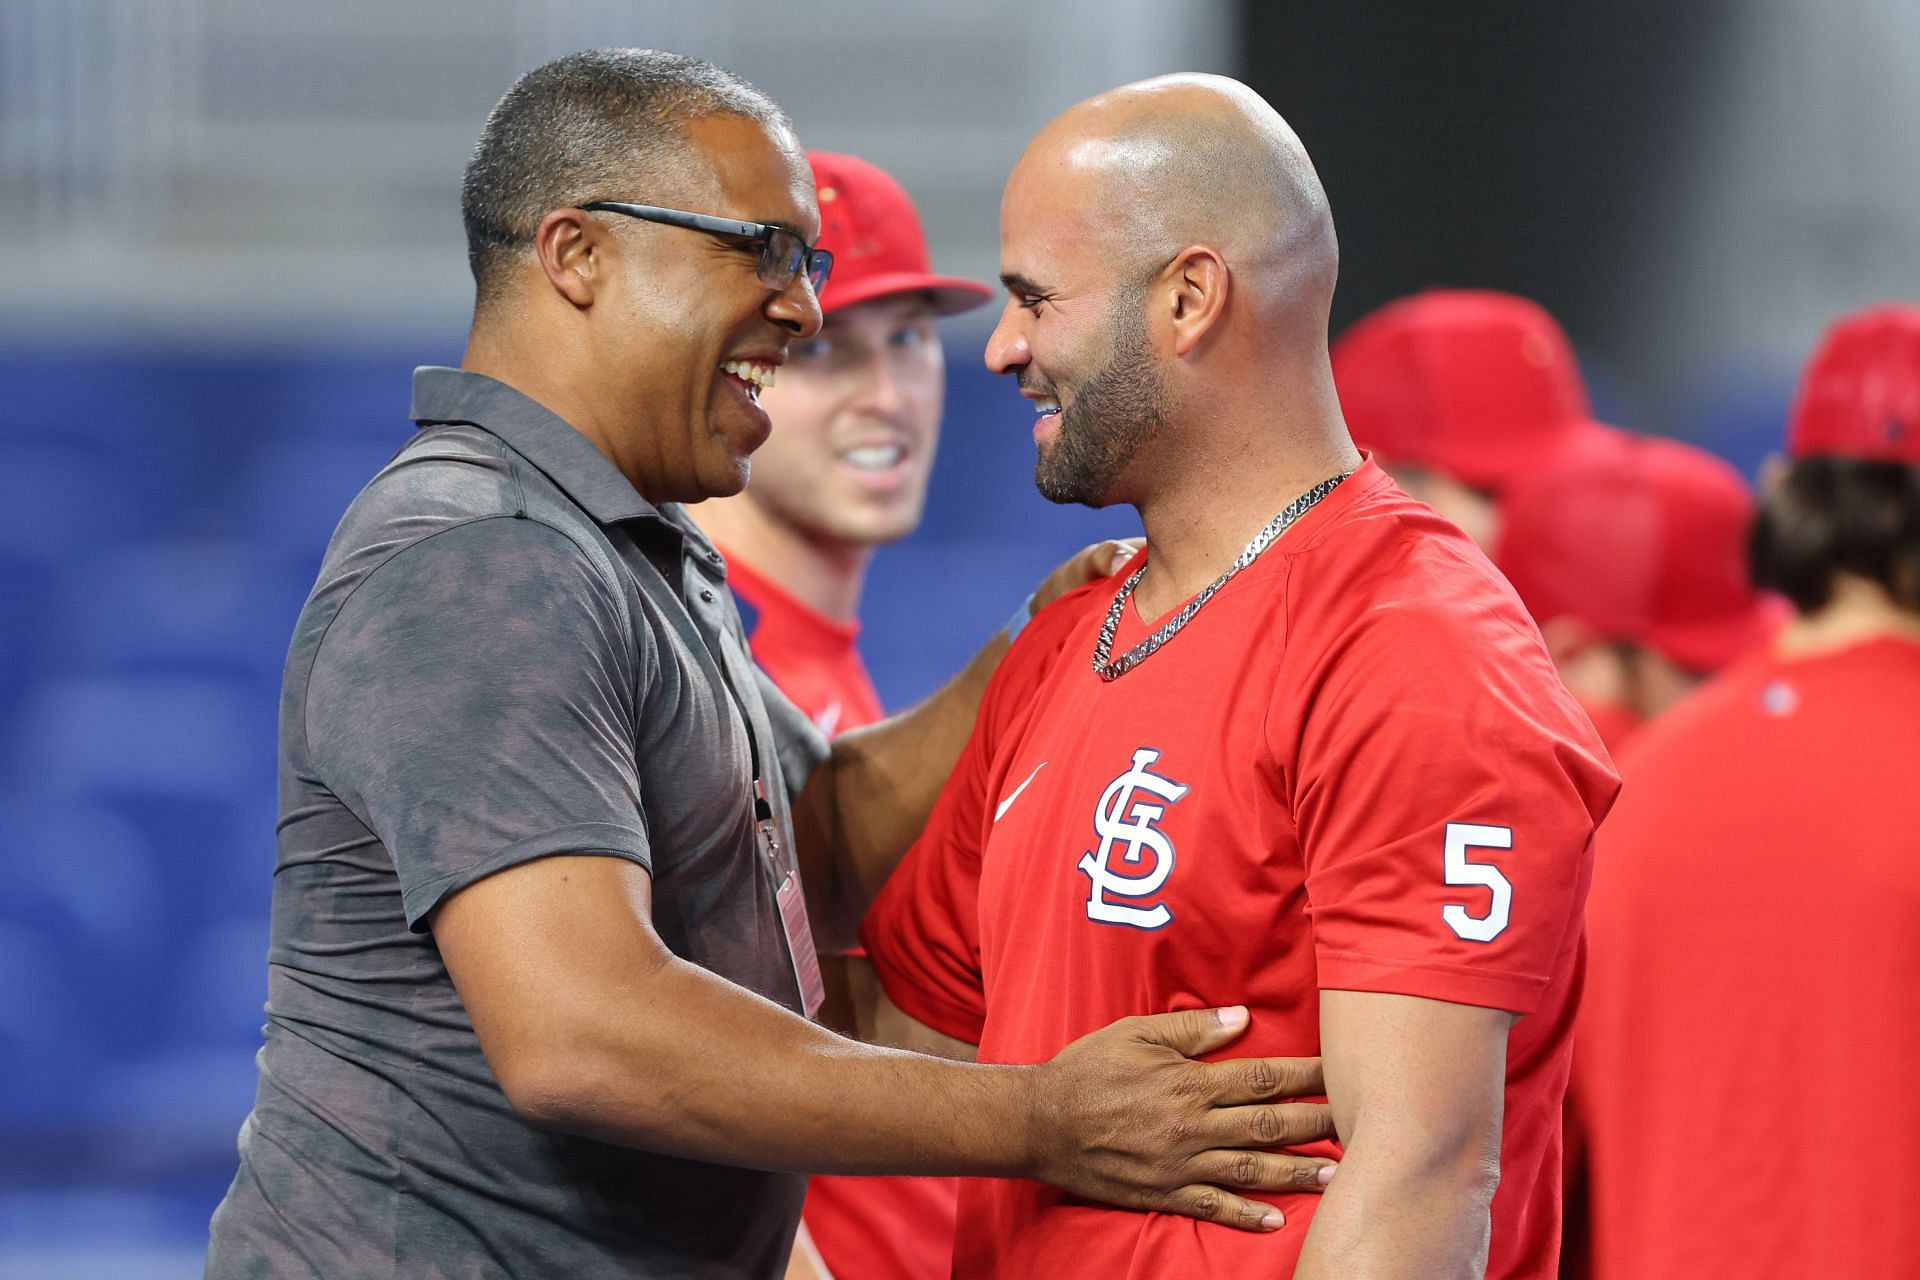 Former teammate and current ESPN MLB Analyst, Eduardo Perez, greets St. Louis Cardinals legend Albert Pujols ahead of their series against the Miami Marlins.